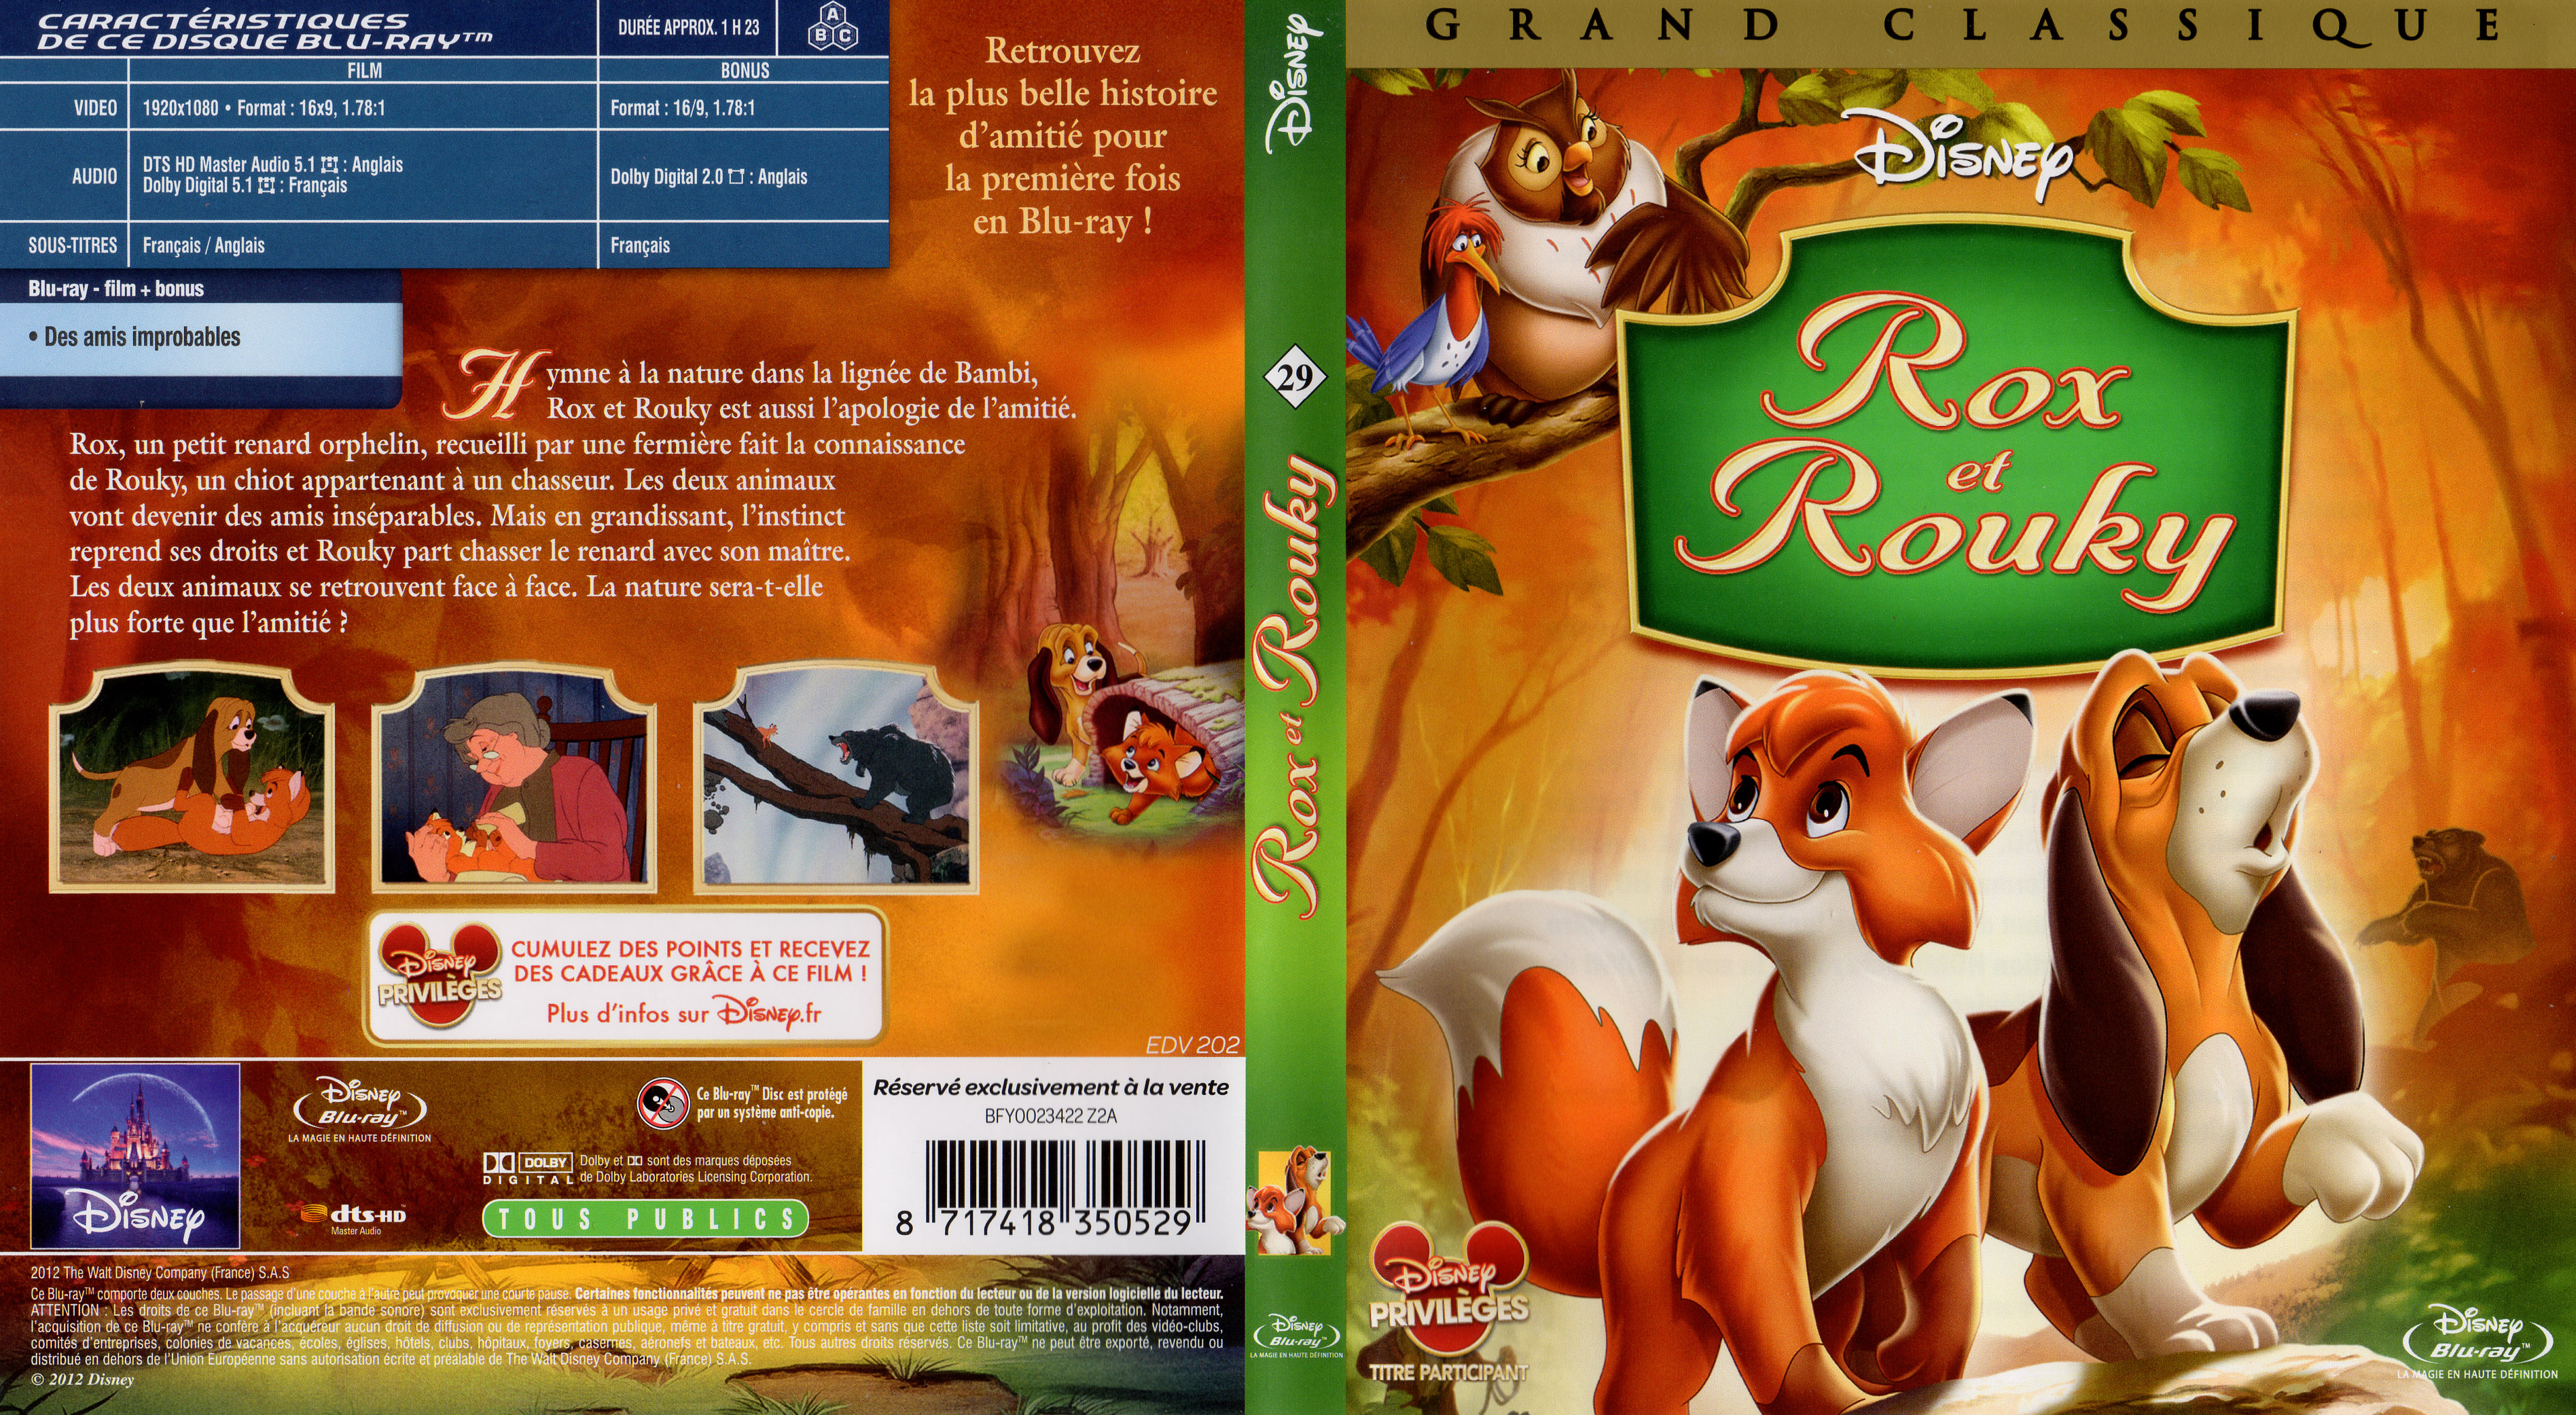 Jaquette DVD Rox et Rouky (BLU-RAY)